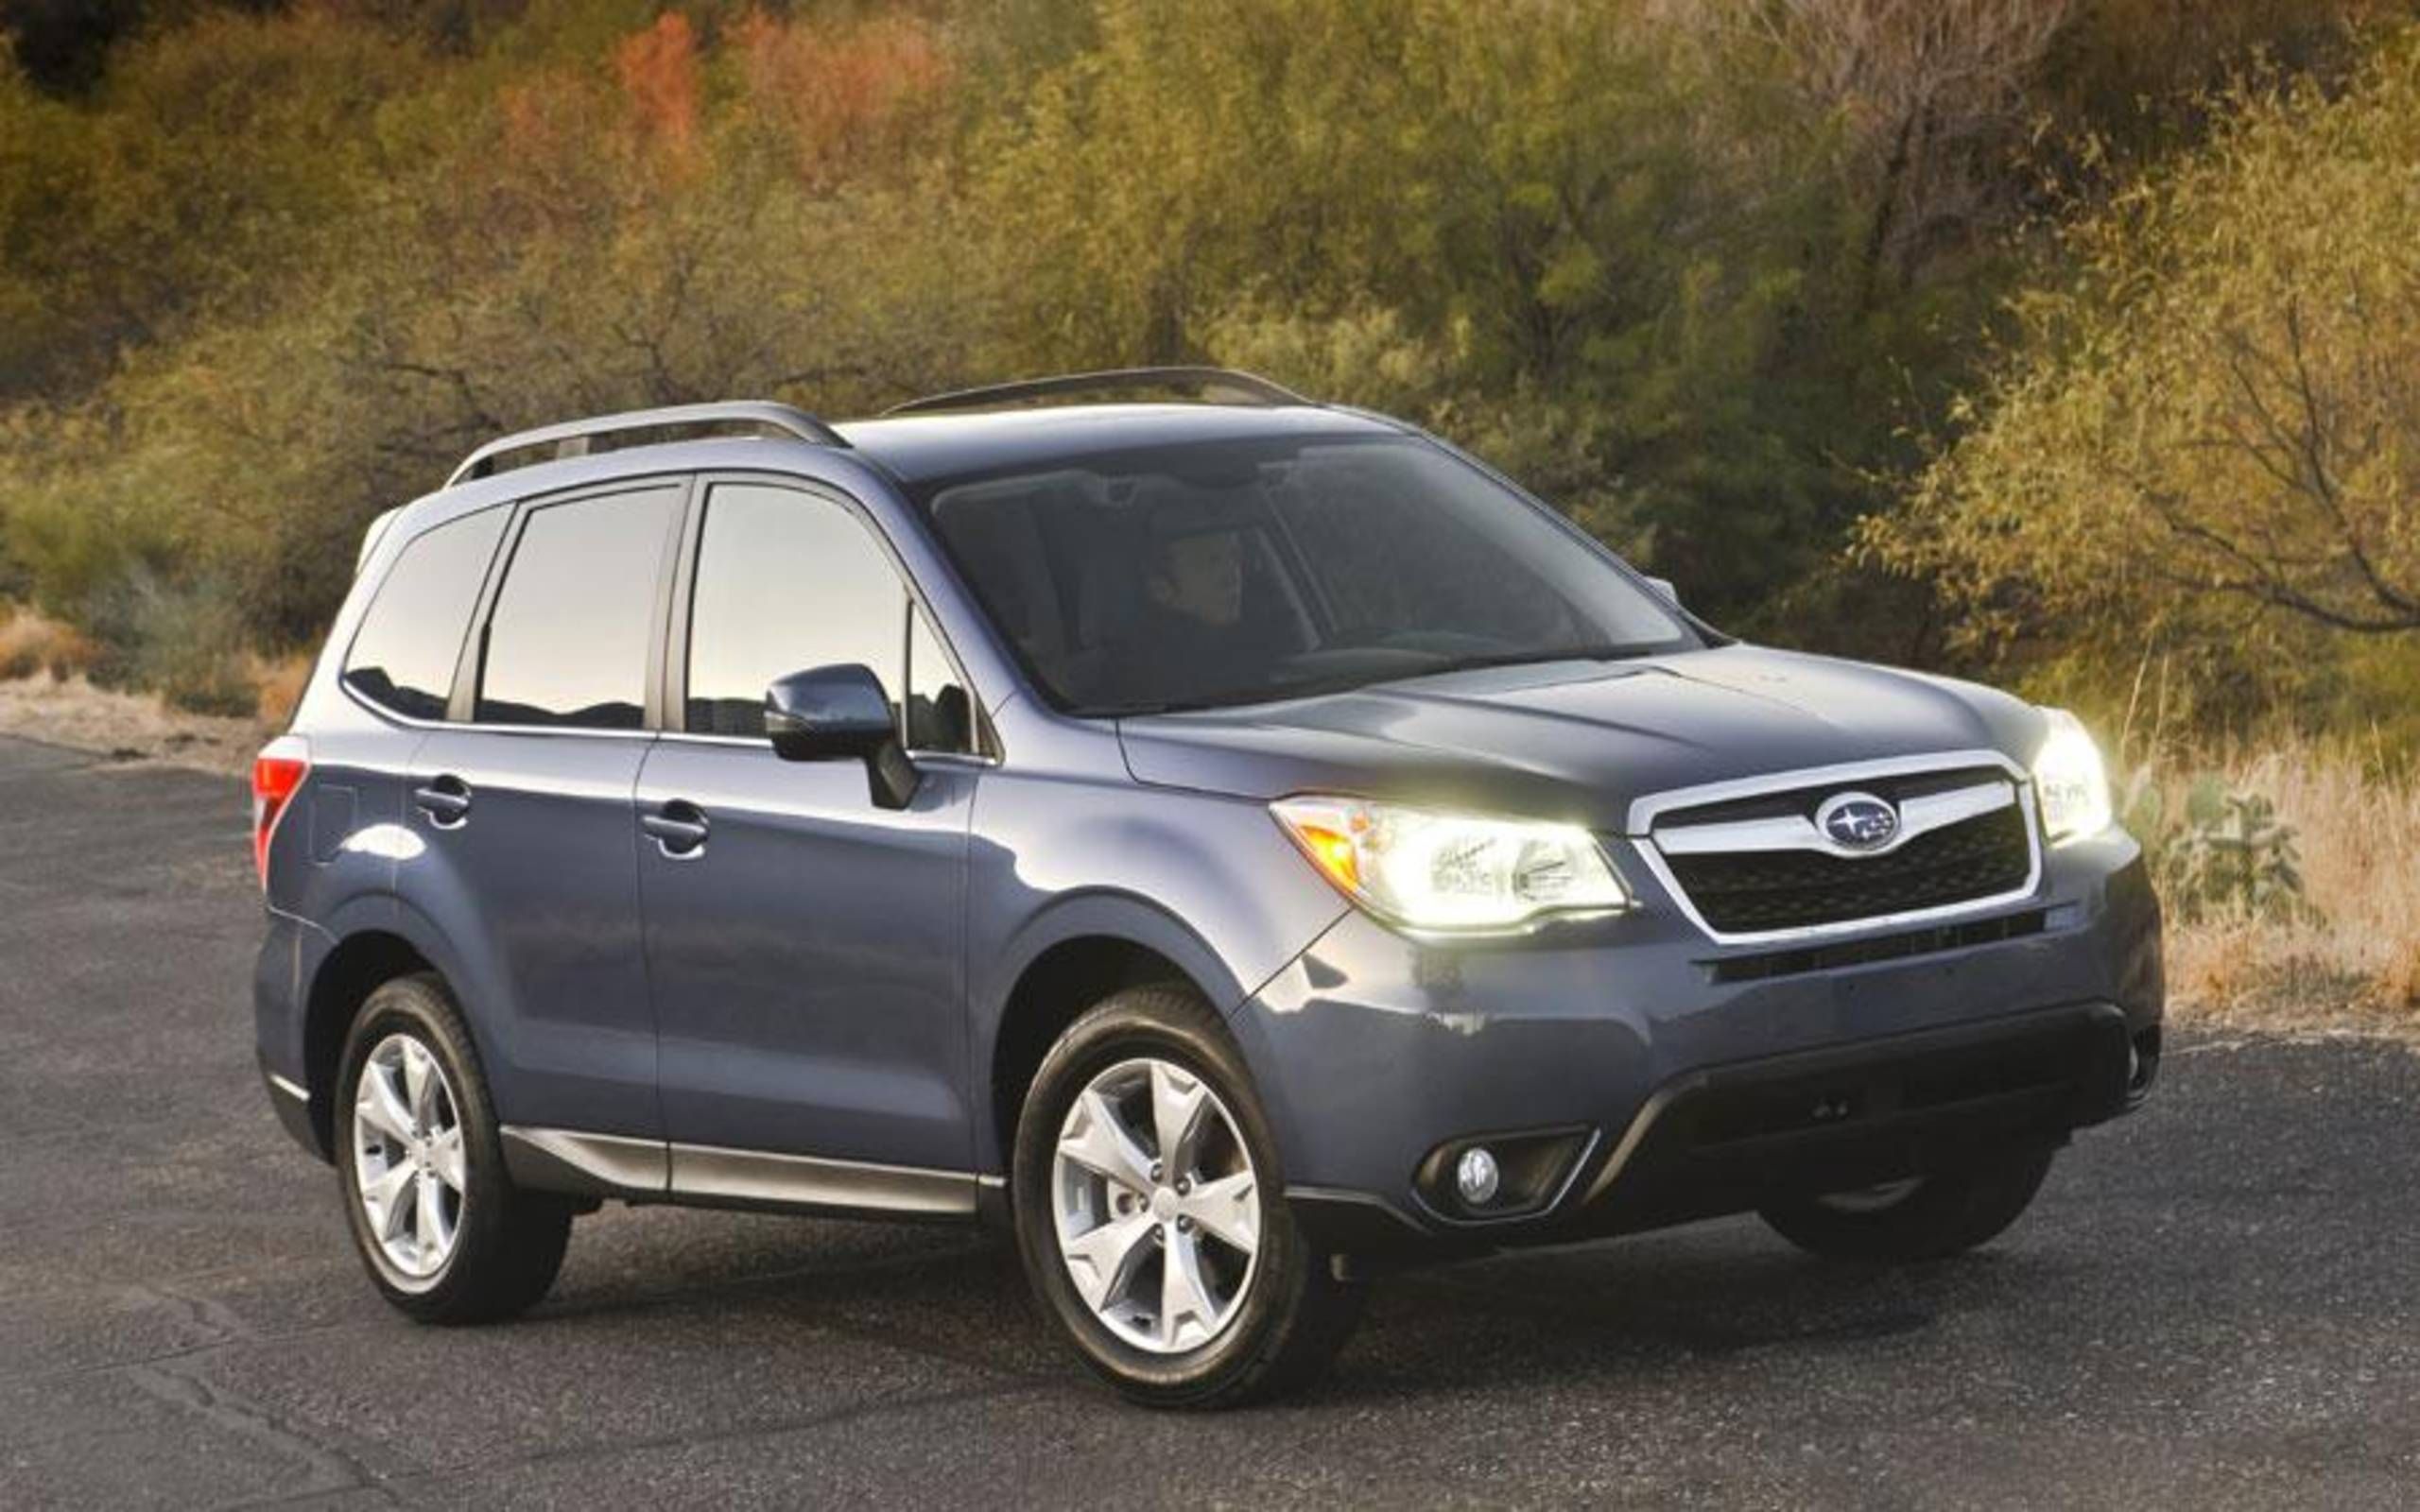 2014 Subaru Forester 2.5i Limited review notes